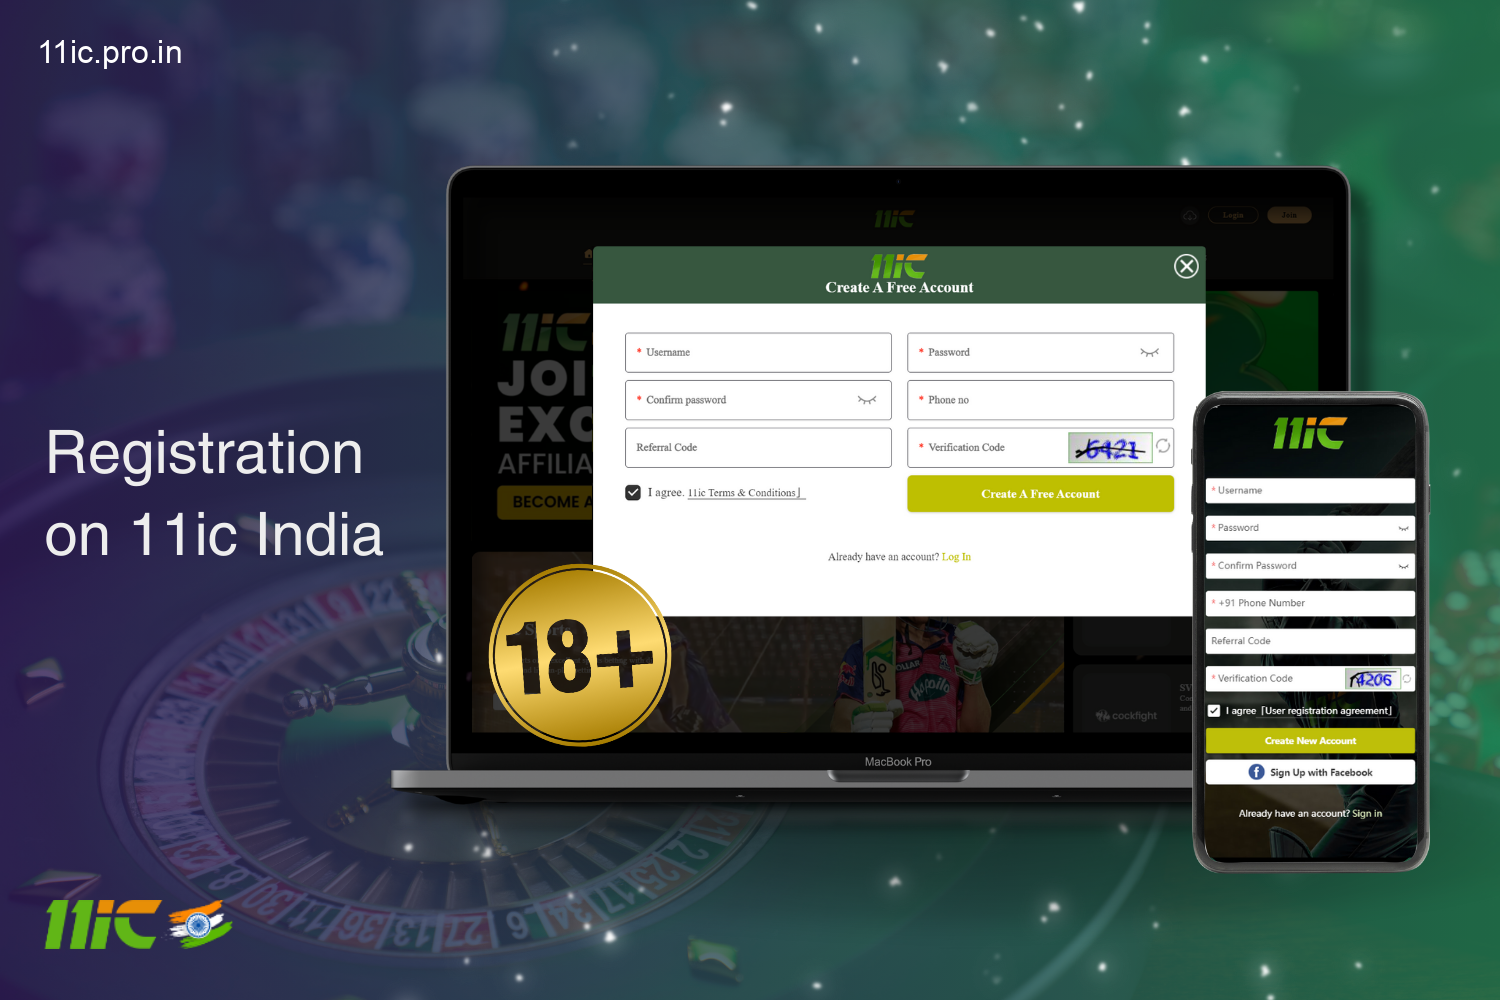 Signing up for 11ic India allows you to create a personal account to access all the benefits of betting and casino games for users from India